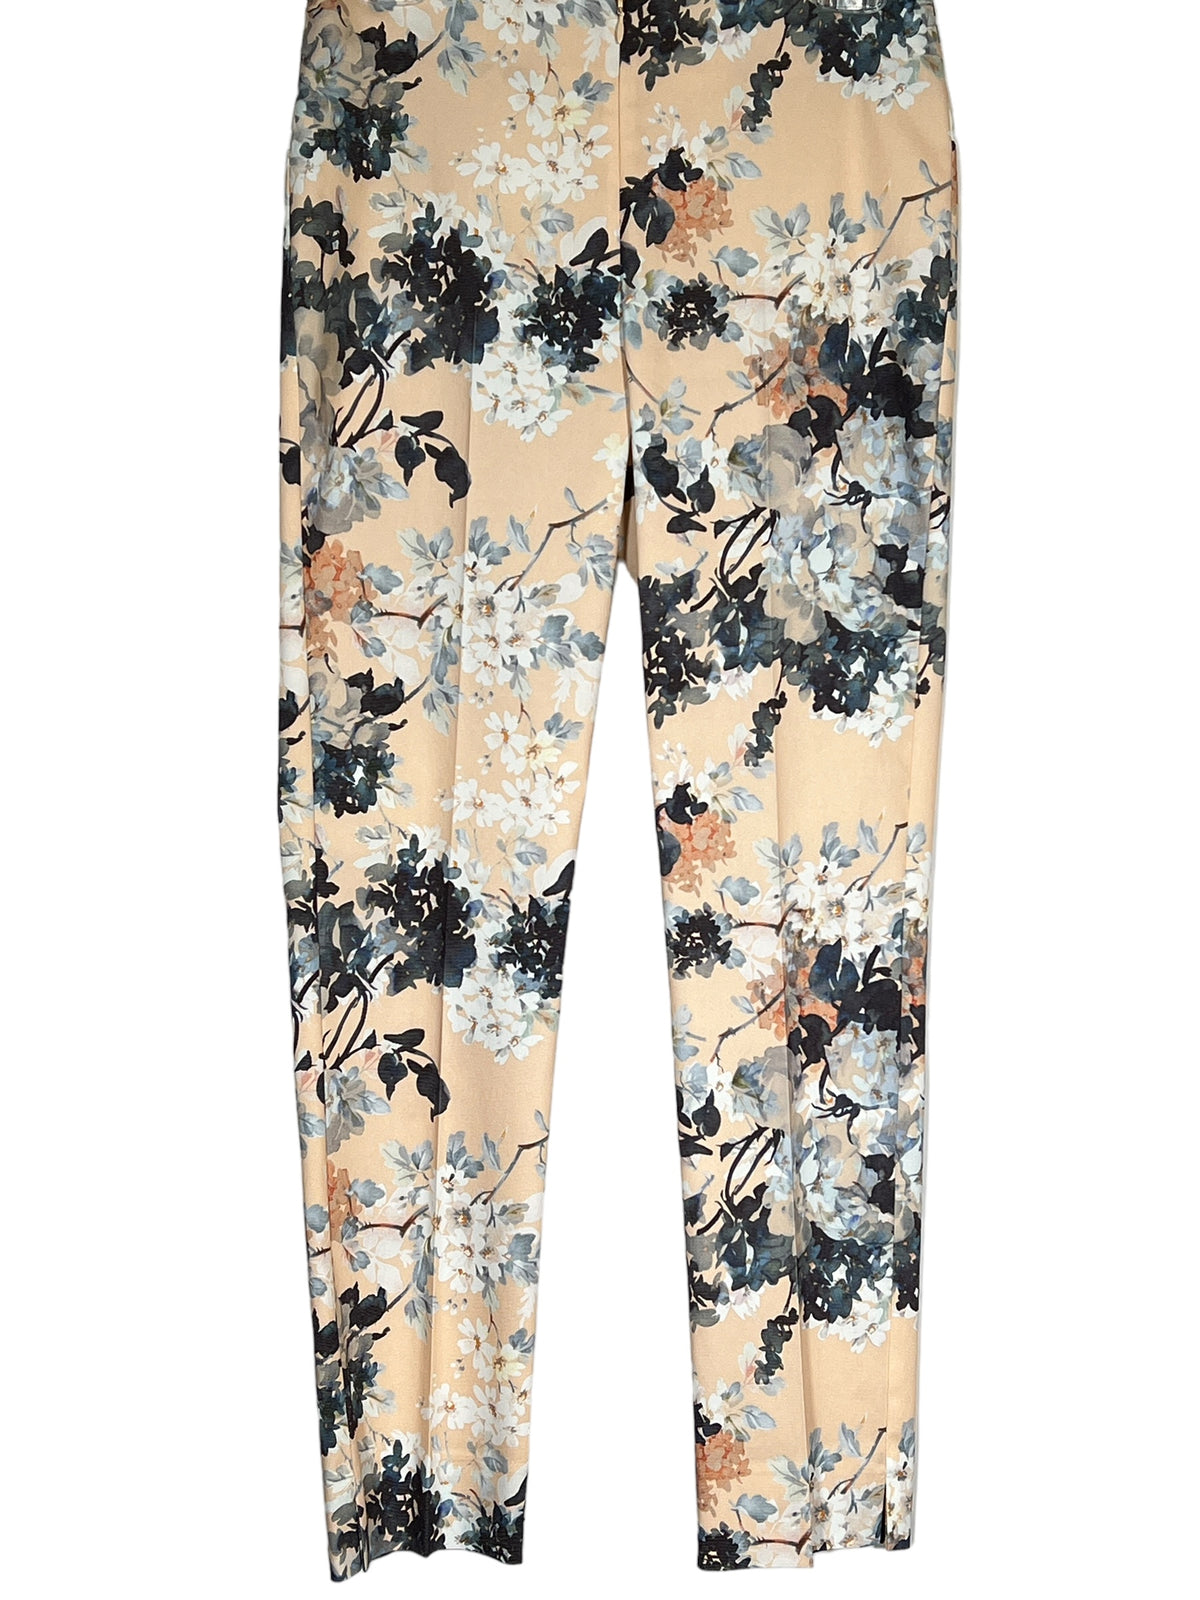 ESTELLE AND FINN ZIP FRONT ANKLE PANT - NAVY FLORAL